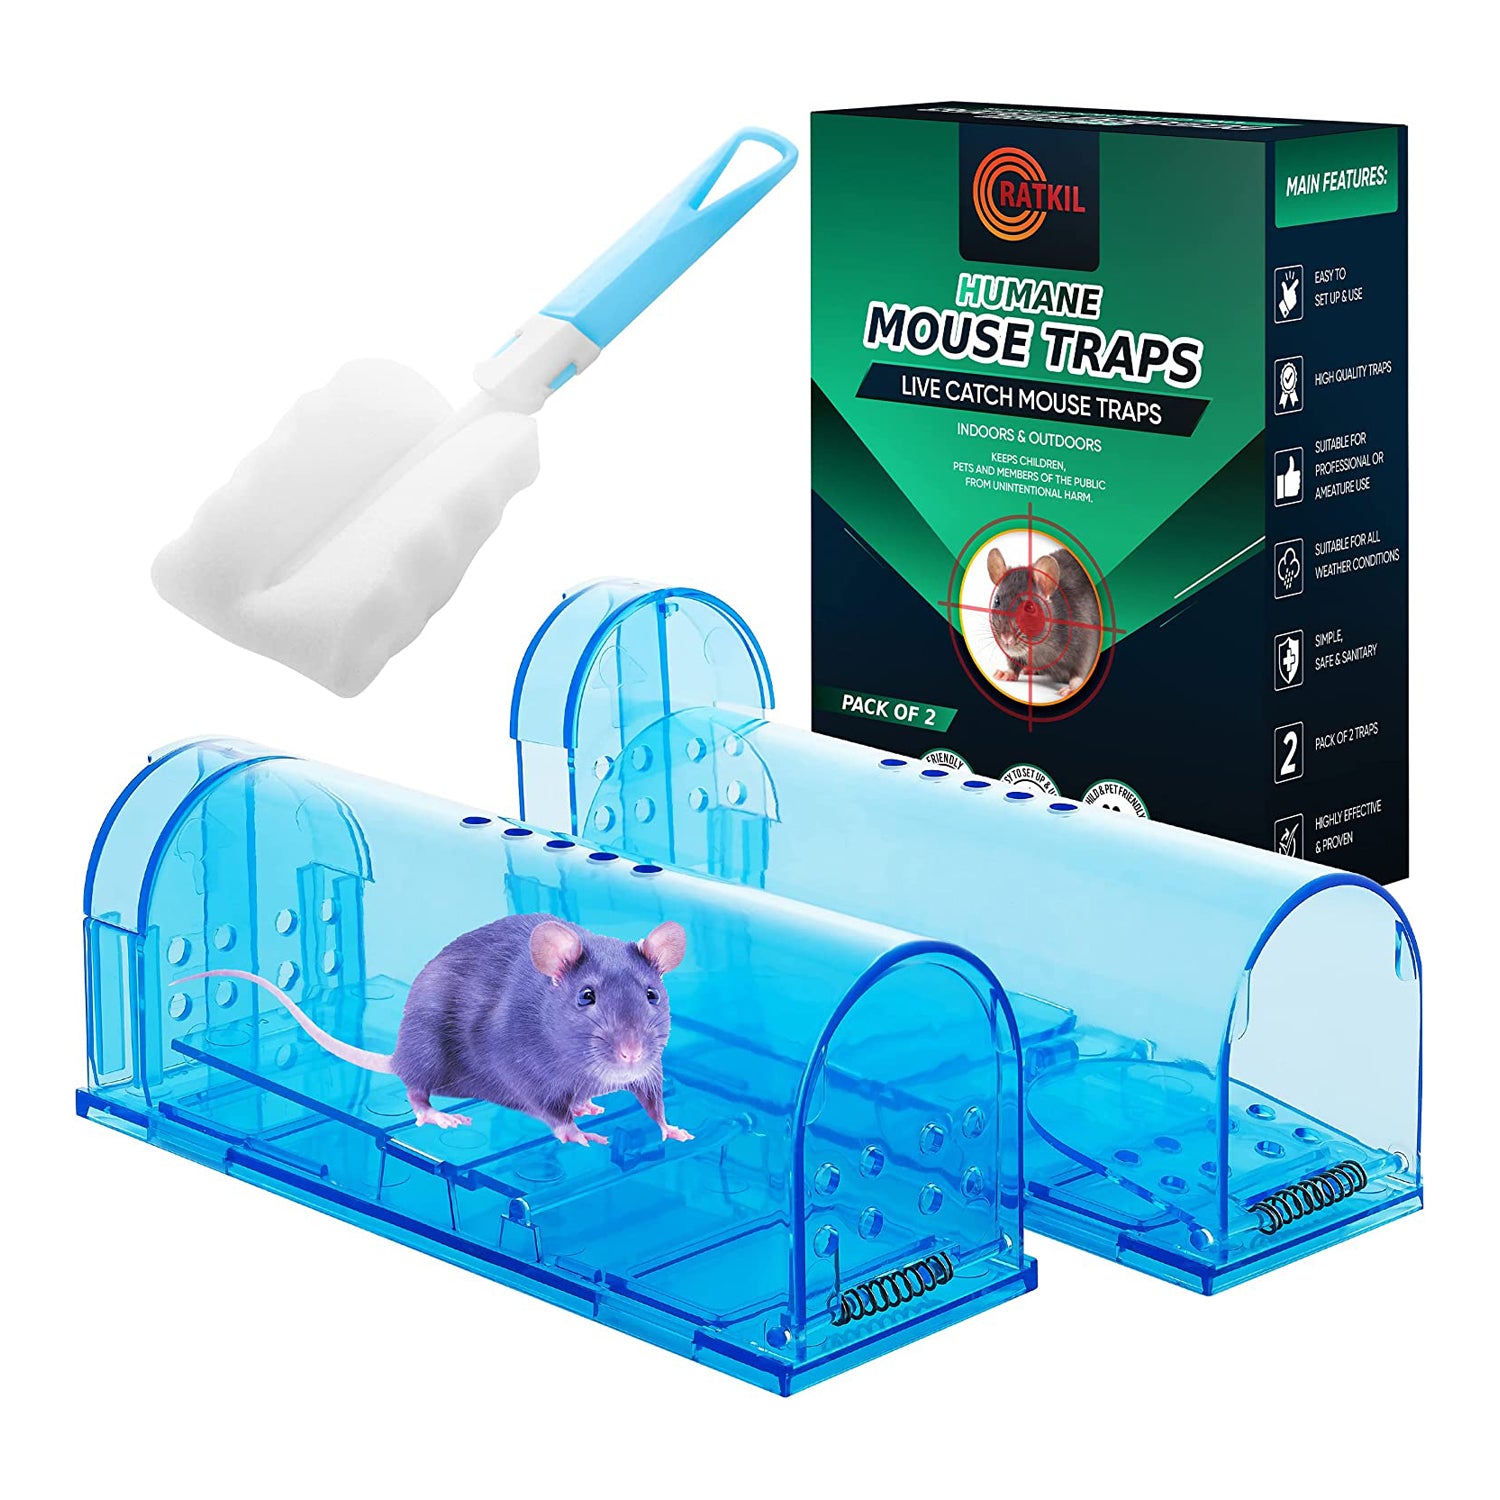 Small Humane Mouse Trap,transparent Live Mice Trap That Work, No Kill Catch  Release Rat Trap, Plastic Mouse Trap Box Indoor Outdoor, 2 Pack